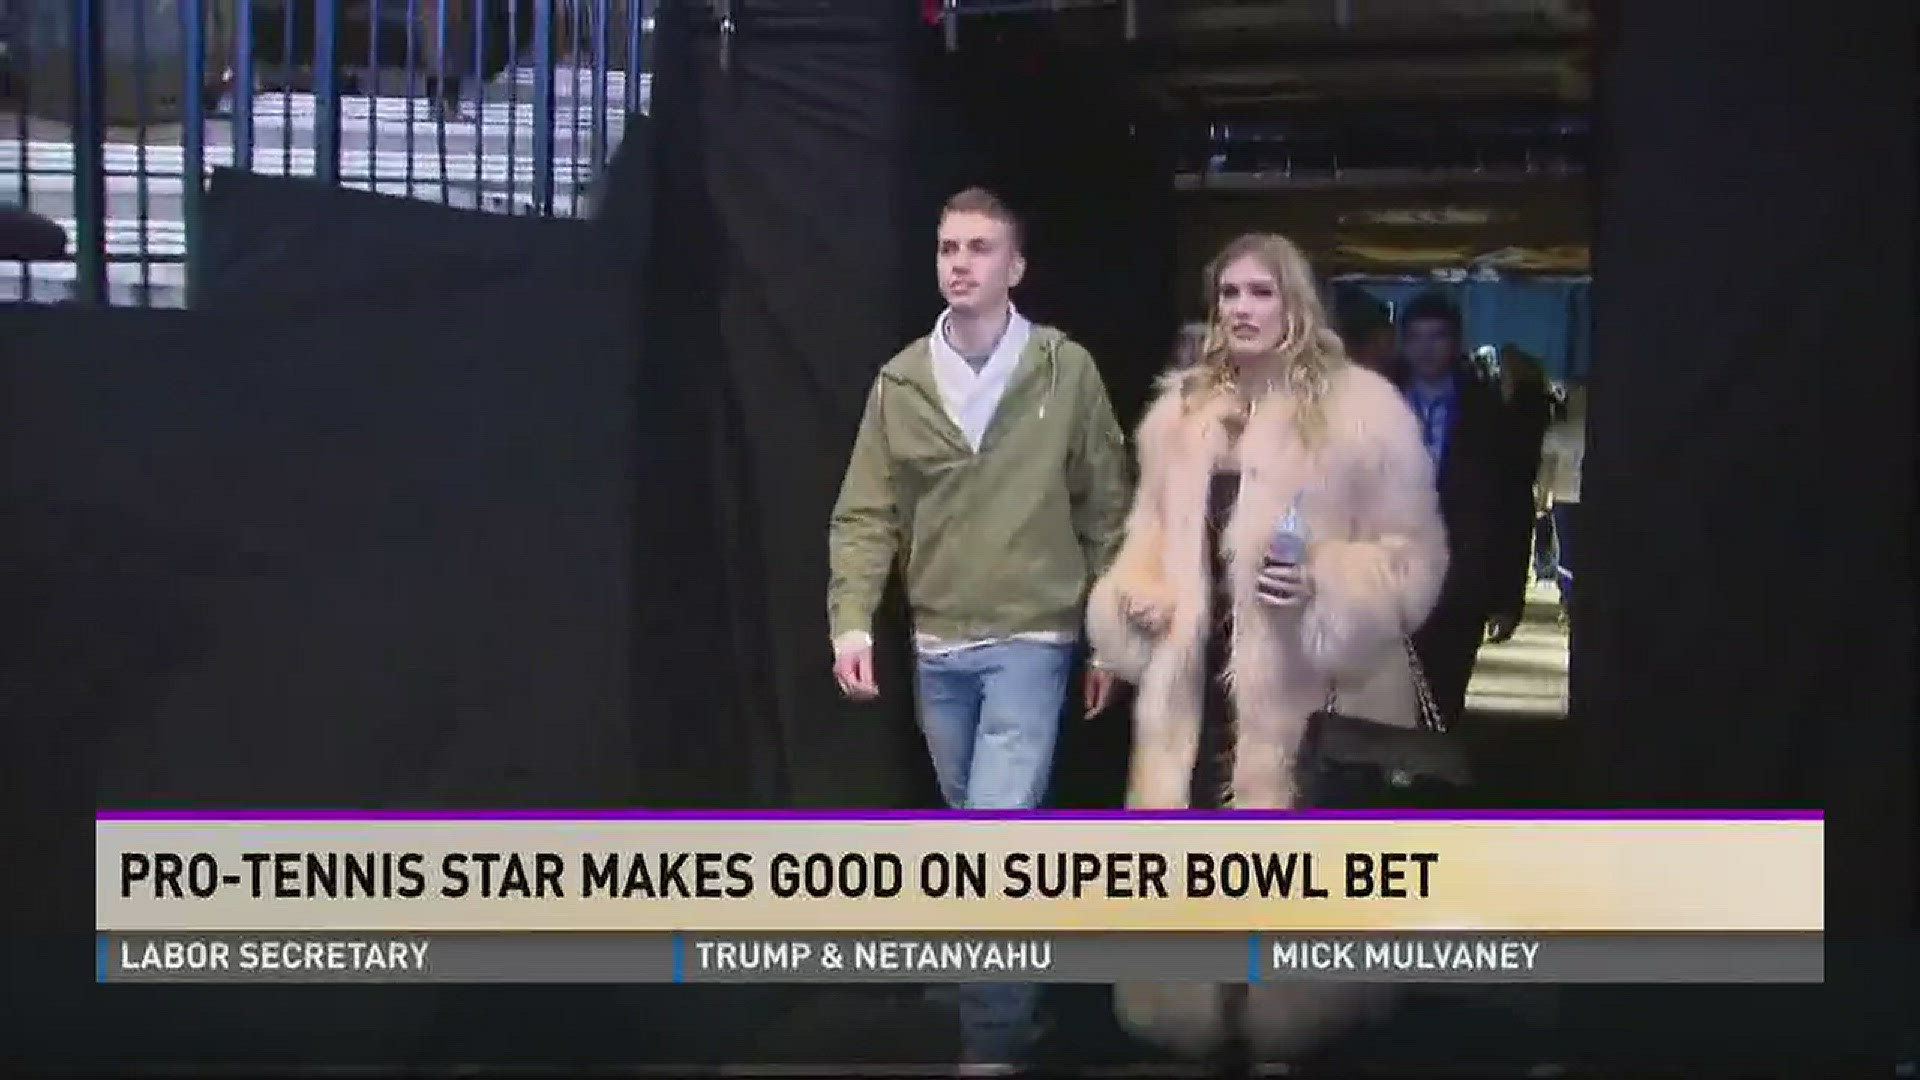 Professional tennis player Genie Bouchard and University of Missouri student John Goehrke had a date Wednesday at the Brooklyn Nets basketball game.